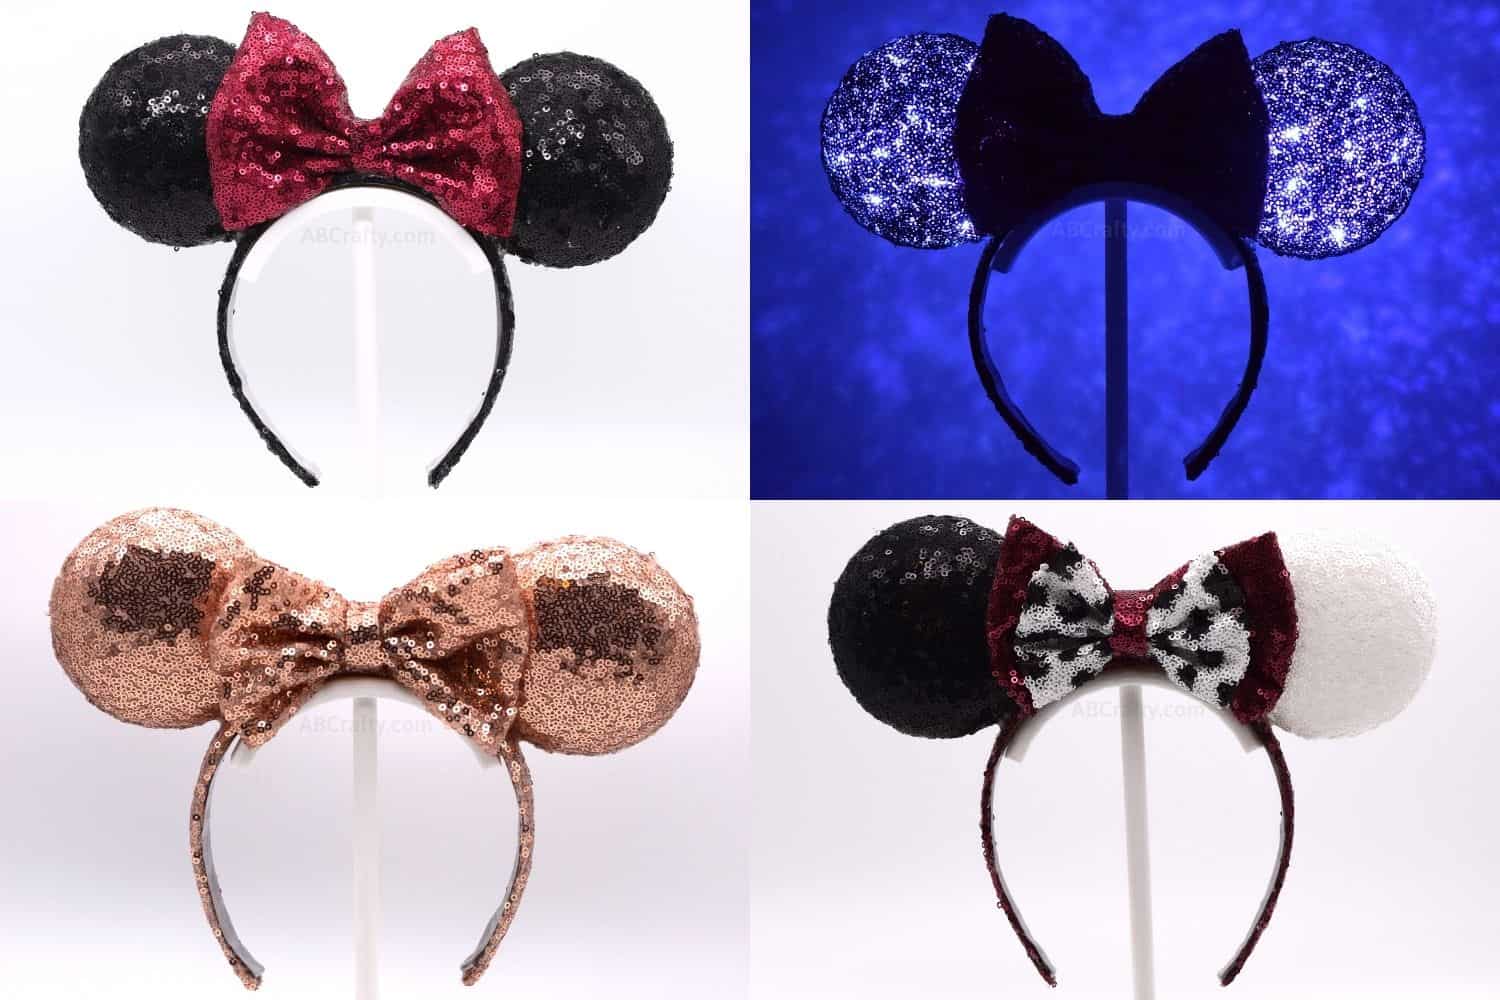 Disney Parks Minnie Mouse Rose Gold Sequined Ear Headband